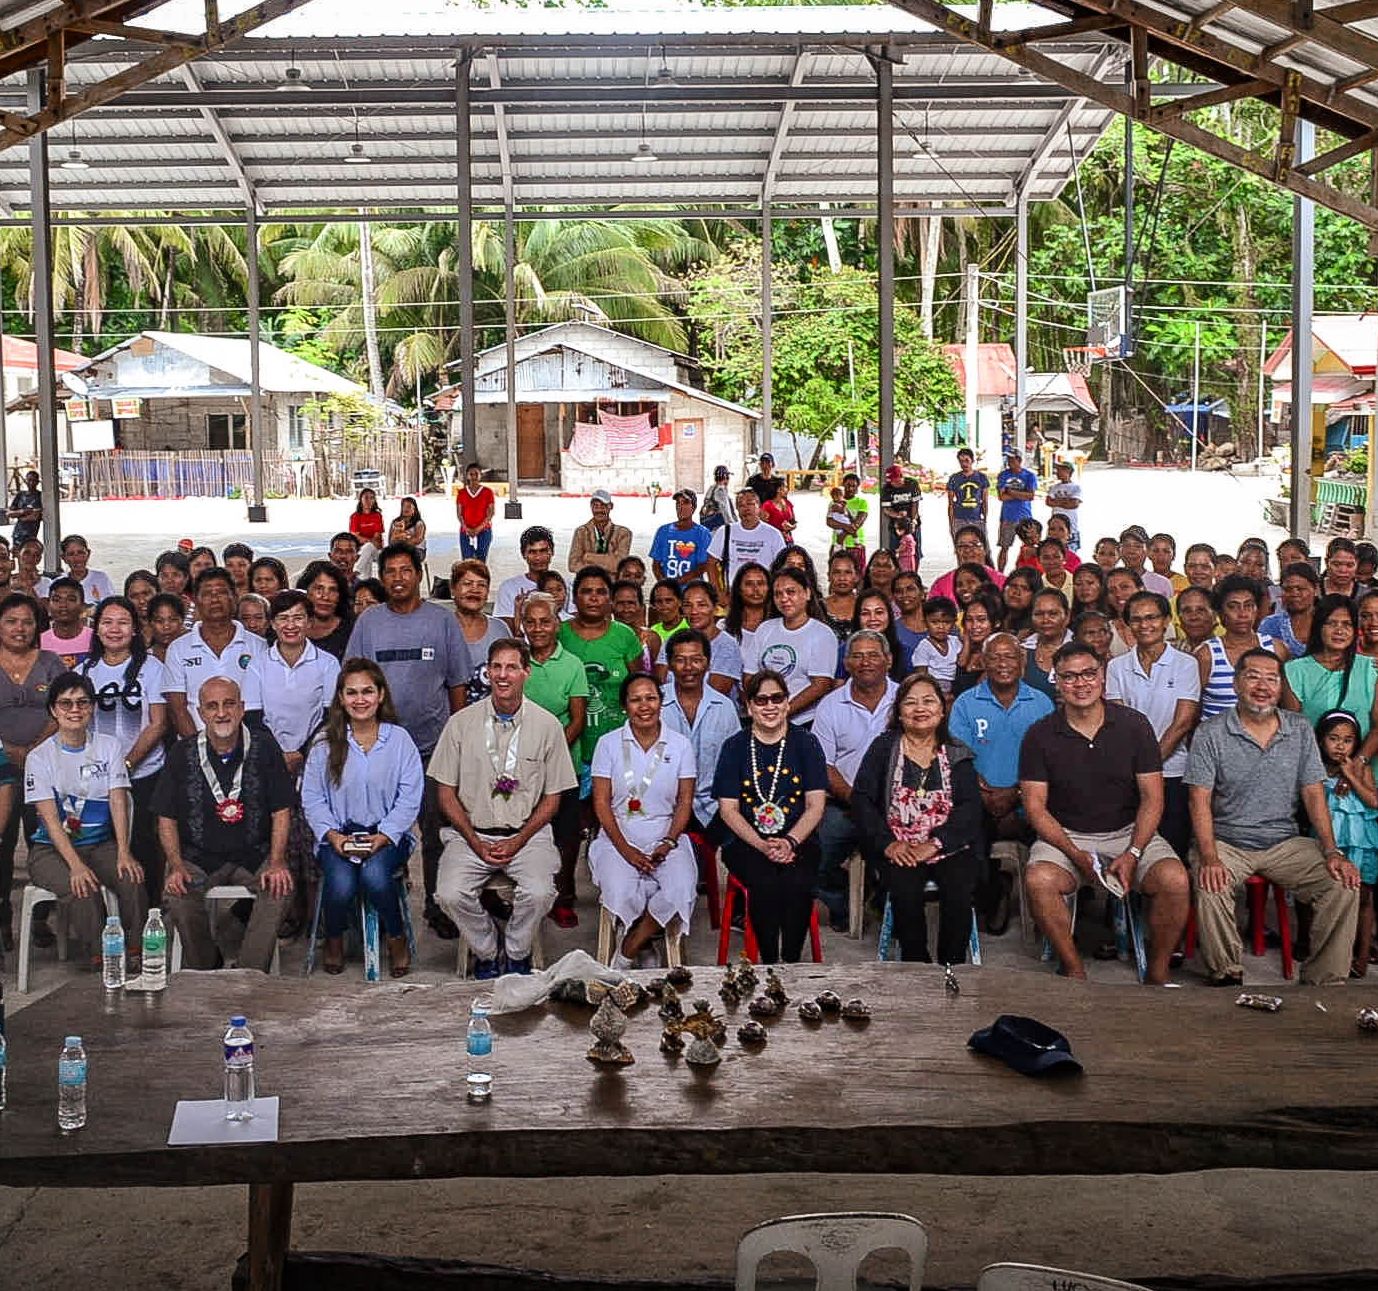 <h1>Project SMILE Launch</h1>
<p>“The goal is to electrify the islands with clean energy as we are one with the European Union in the objective of increasing the share of renewables in the energy mix,”</p>
<p style="text-align: right;"><a href="https://support.wwf.org.ph/resource-center/story-archives-2019/project-smile-launch/" target="_blank">Read More &gt;</a></p>